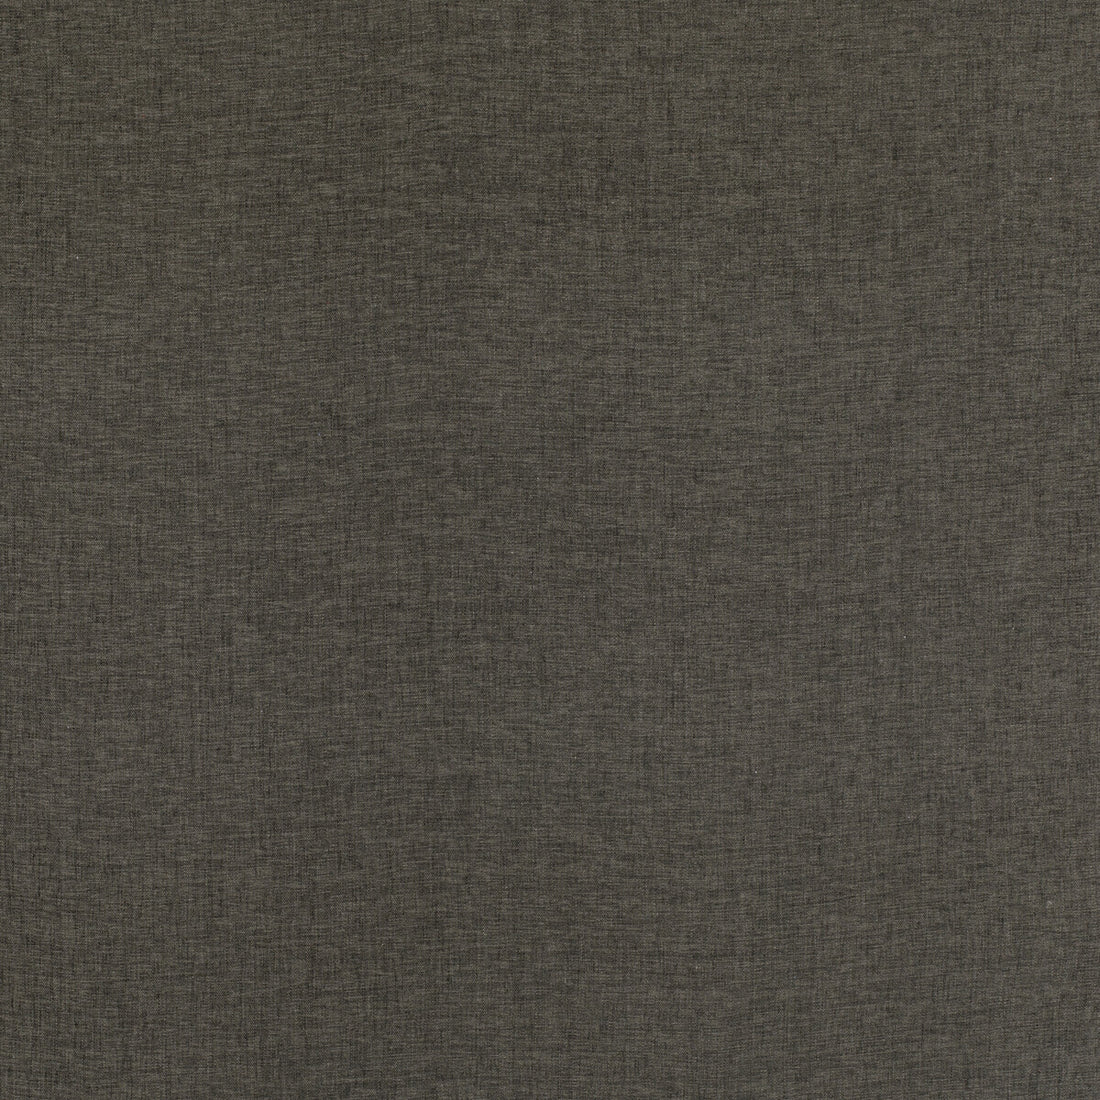 Kravet Smart fabric in 36095-621 color - pattern 36095.621.0 - by Kravet Smart in the Eco-Friendly Chenille collection